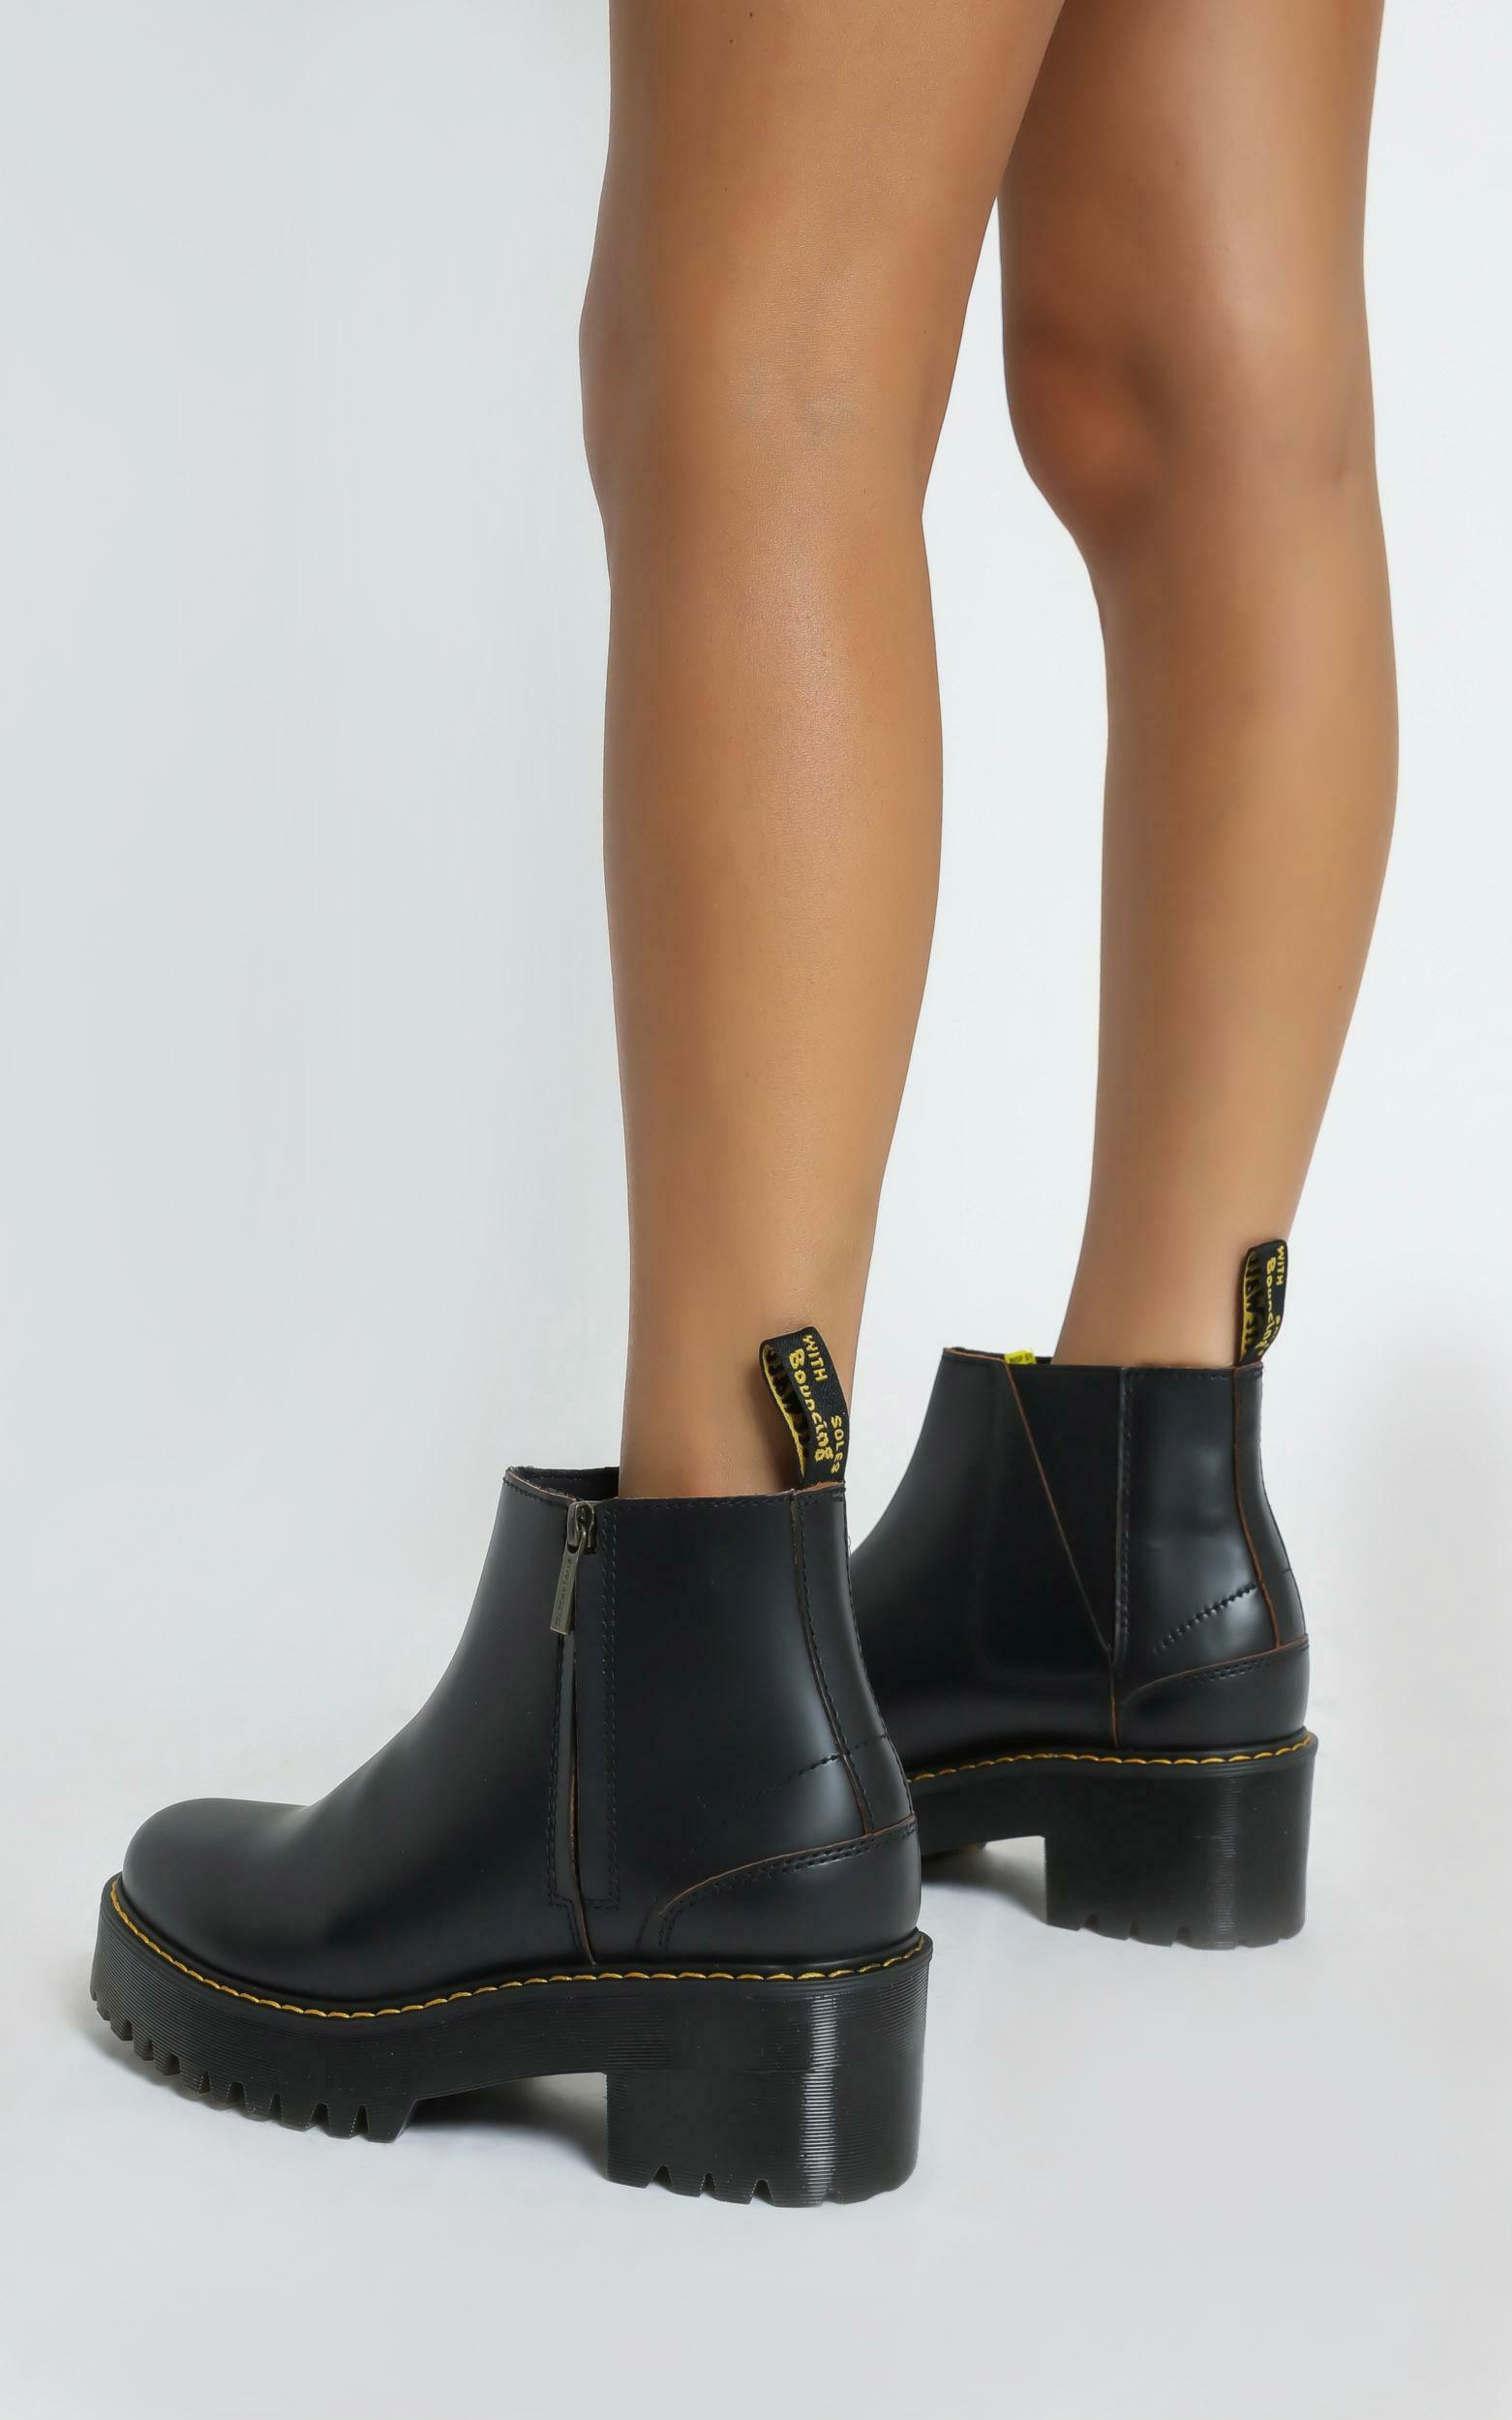 Dr. Martens - Rometty II Chelsea Boot in Black - 06, BLK1, hi-res image number null